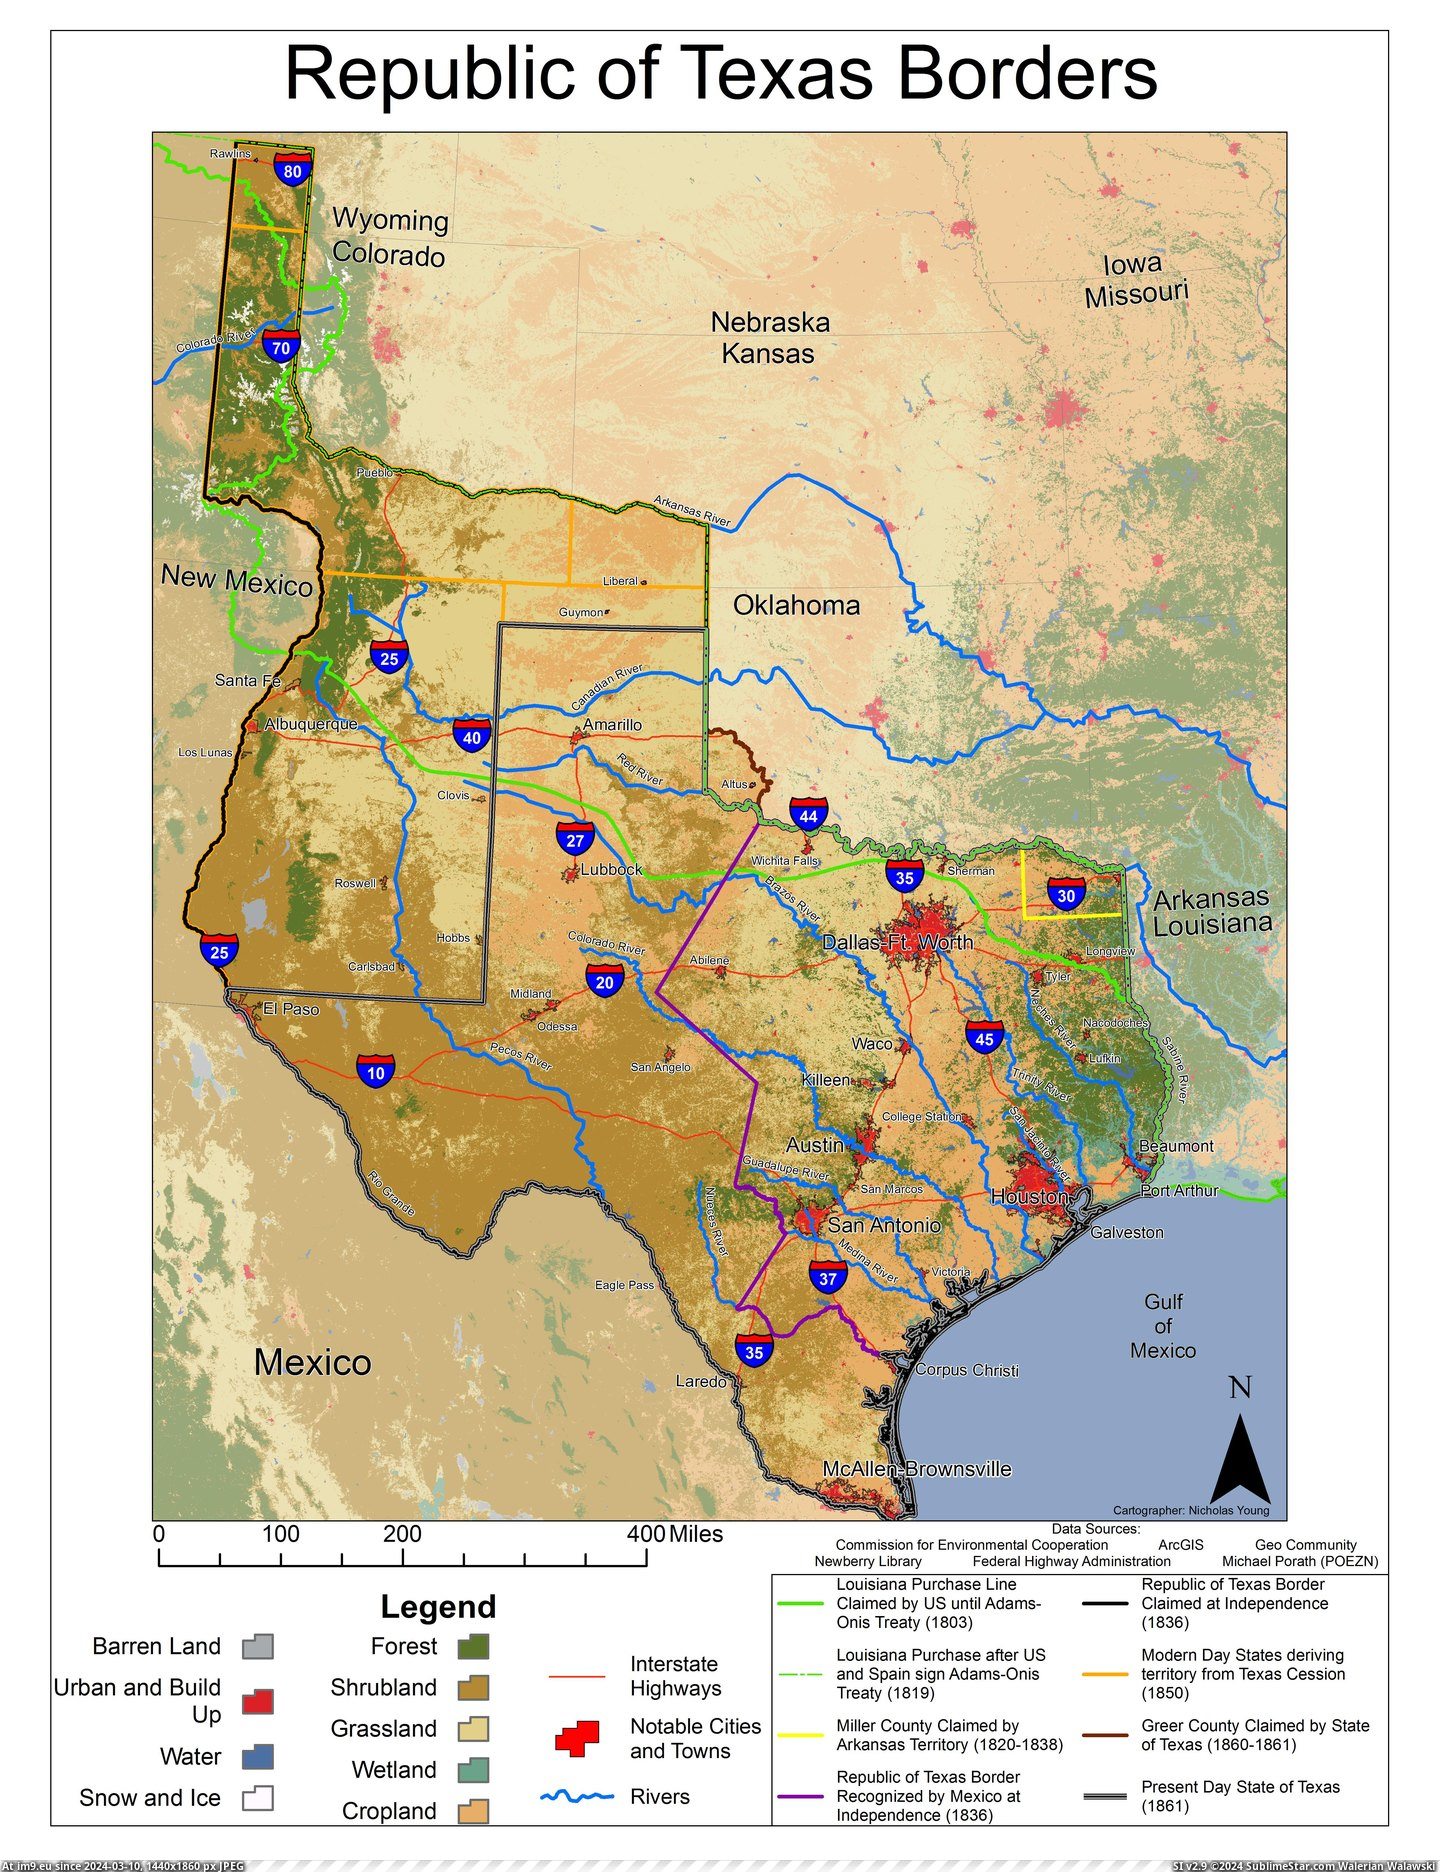 #Texas #Borders #Historical [Mapporn] Historical borders of Texas [5100x6600] Pic. (Image of album My r/MAPS favs))